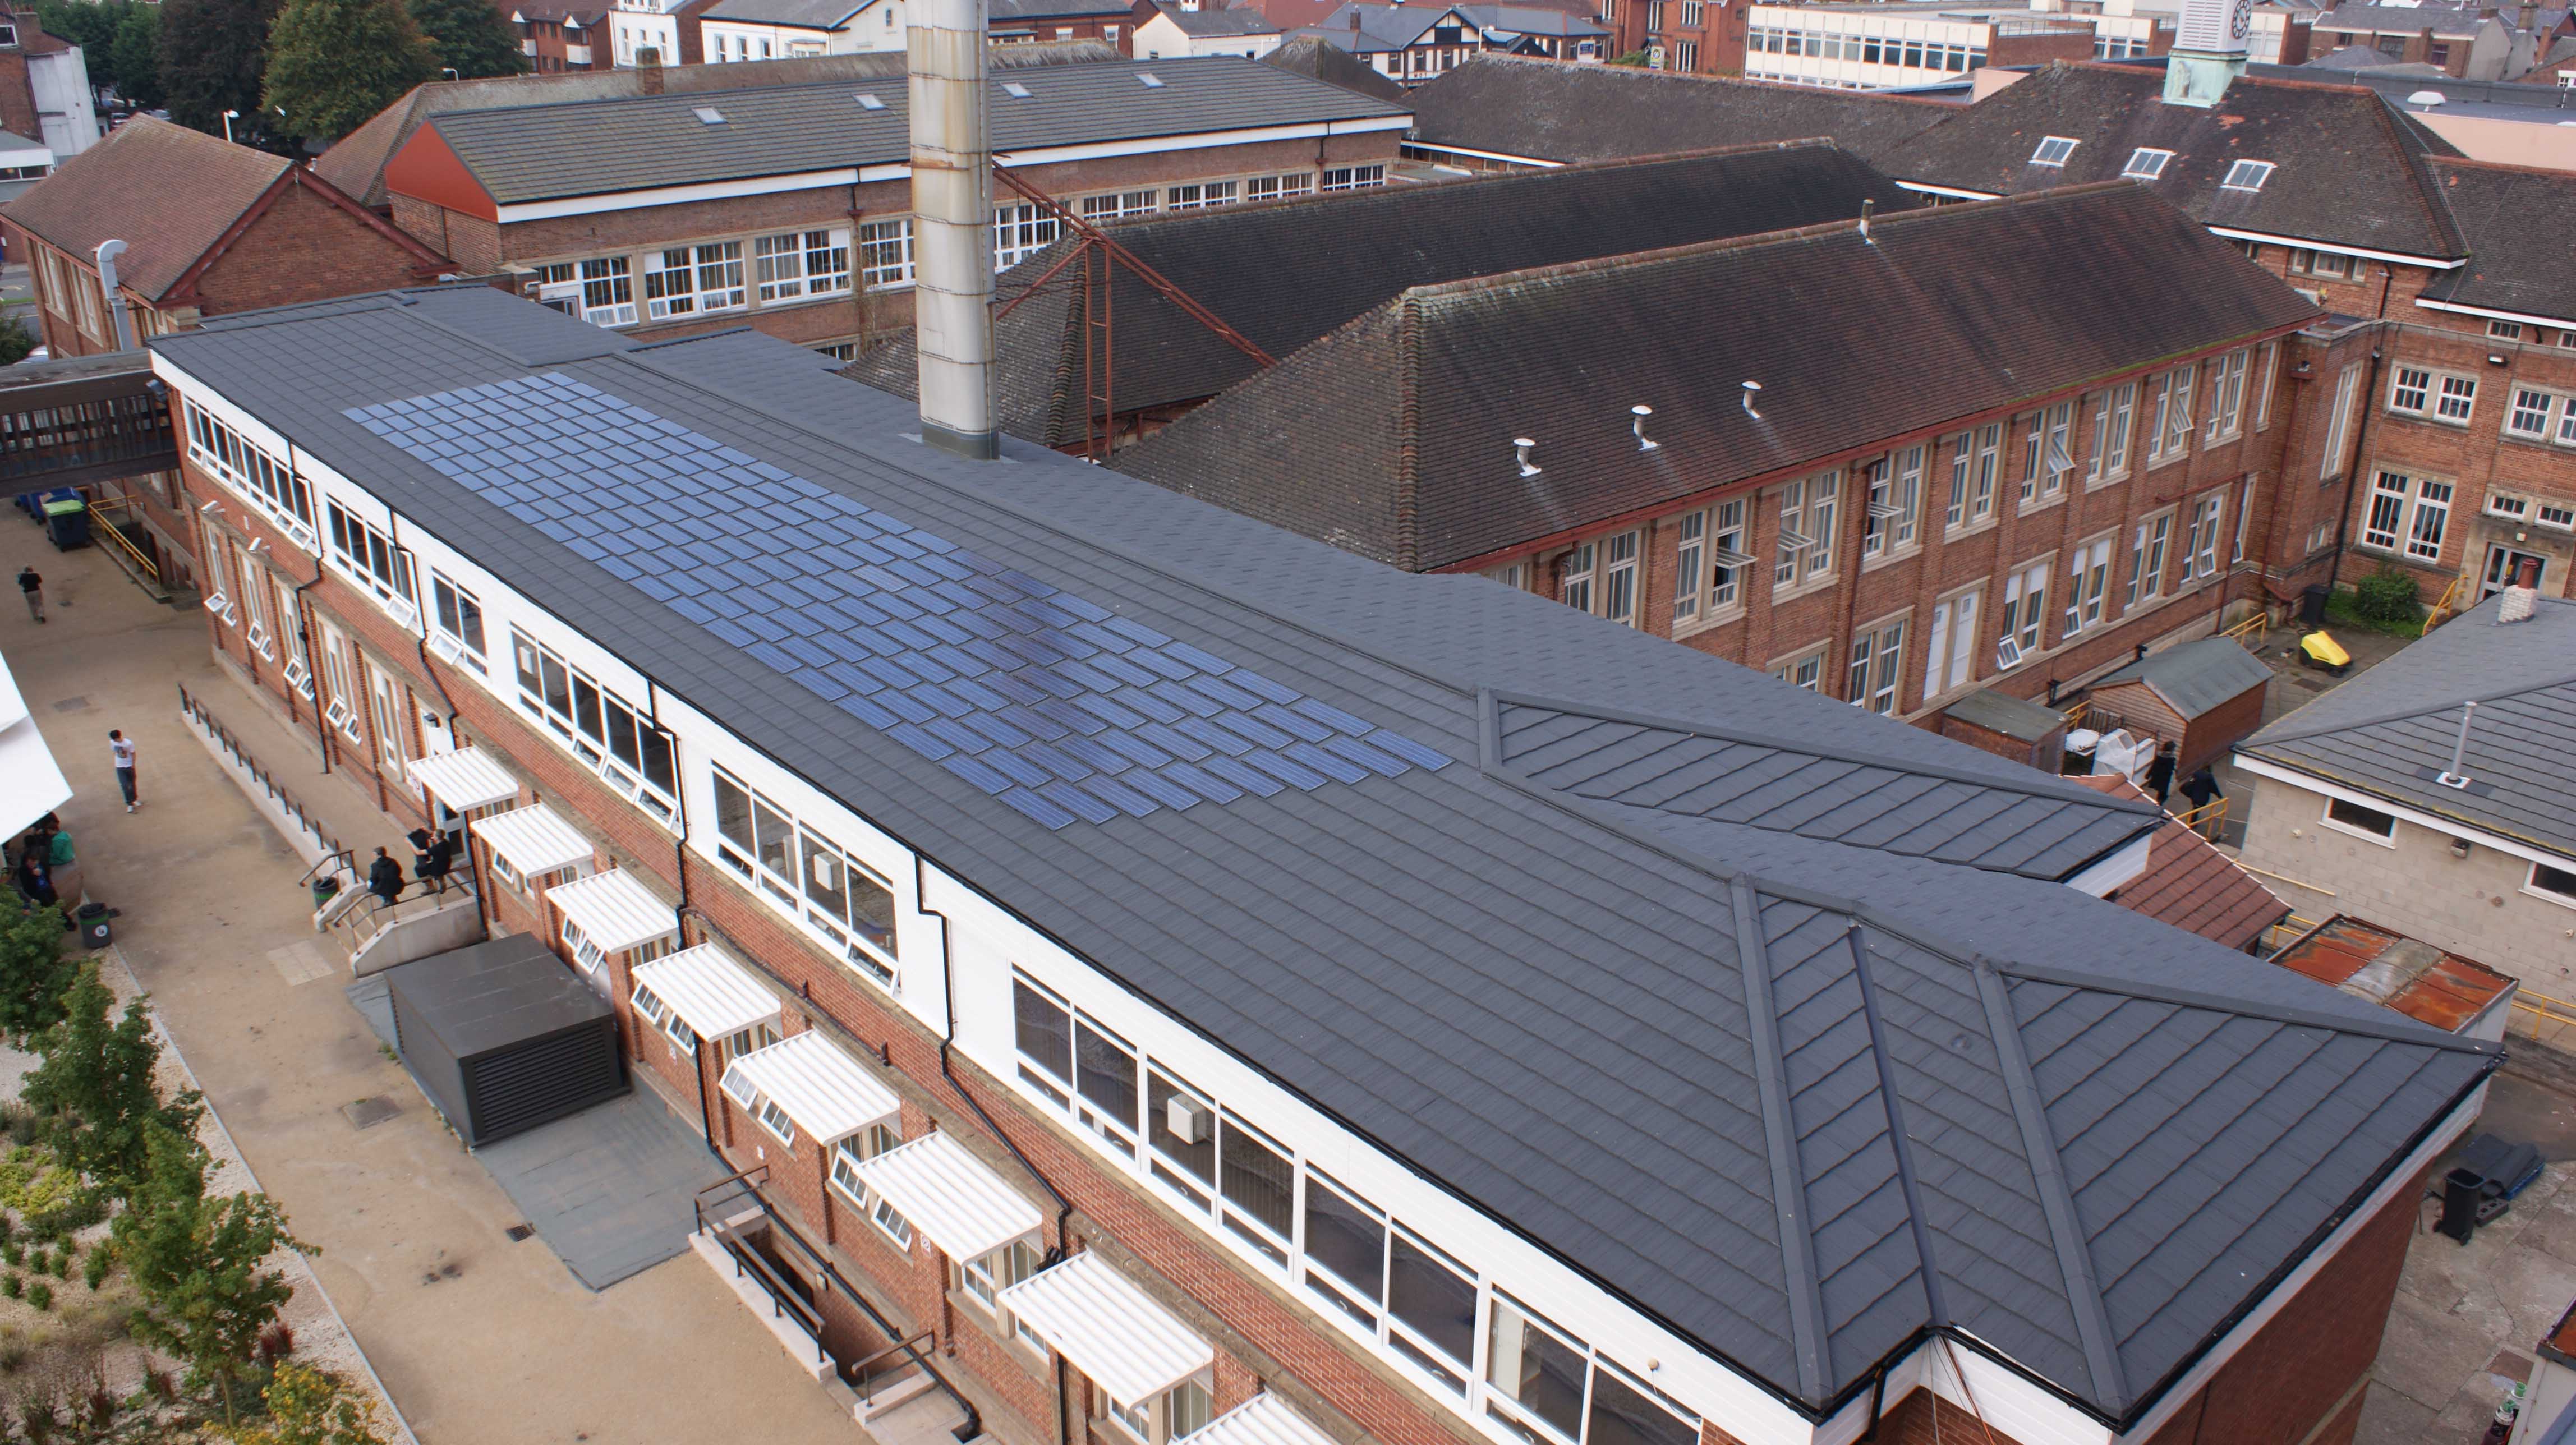 Southport College Roofing Refurbishment - Charcoal Slate with Integrated Photovoltaic Roof Tiles